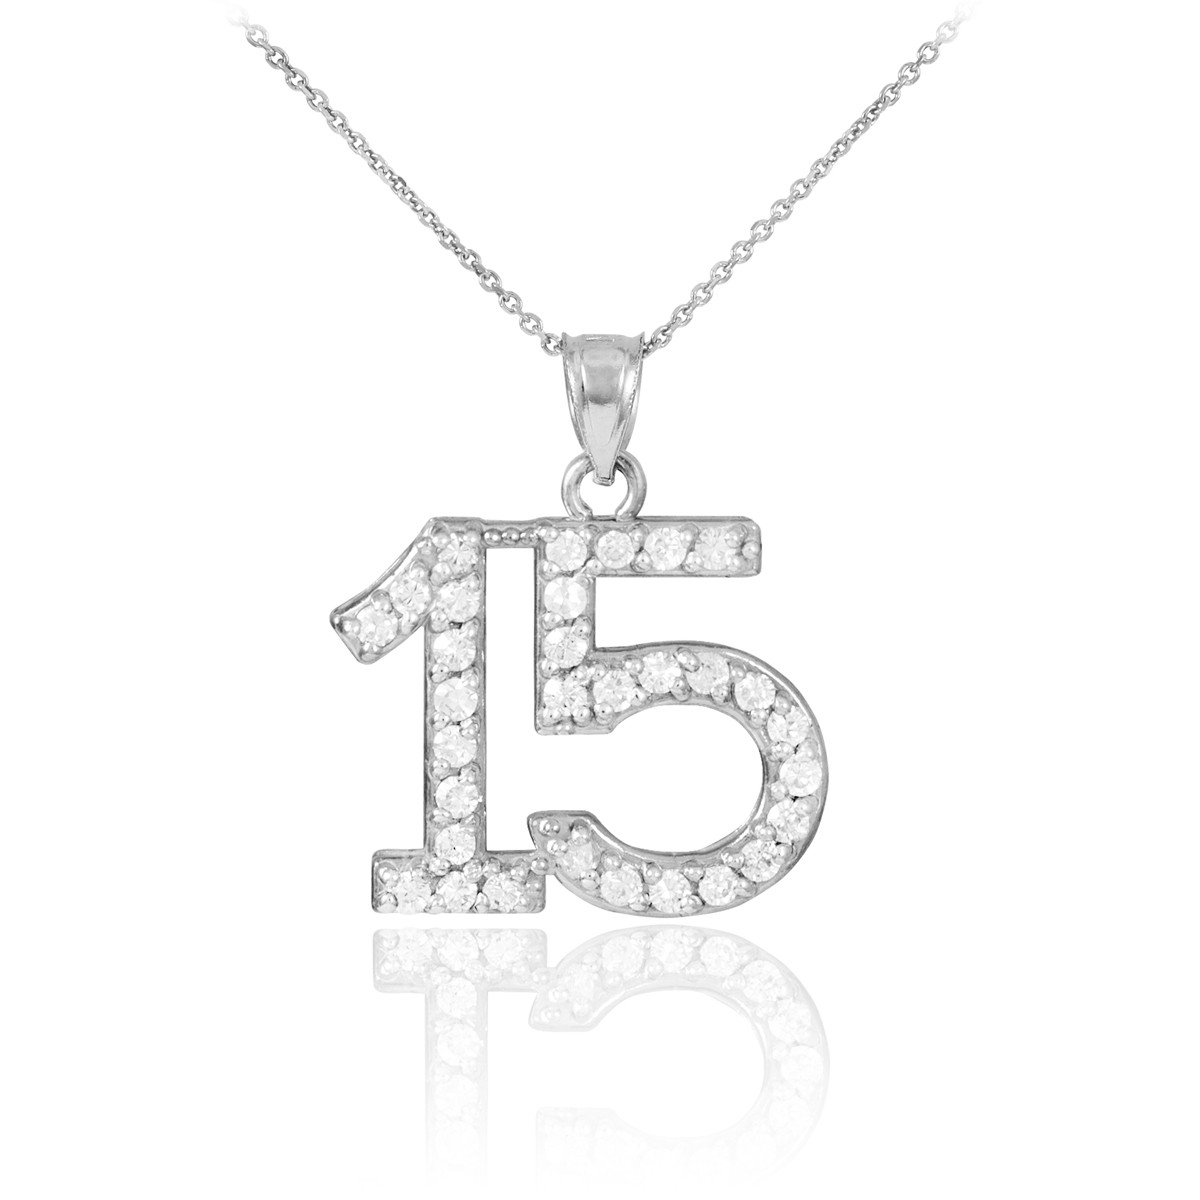 Quinceanera 15 Anos Pendant Necklace with diamonds in 14k white gold.